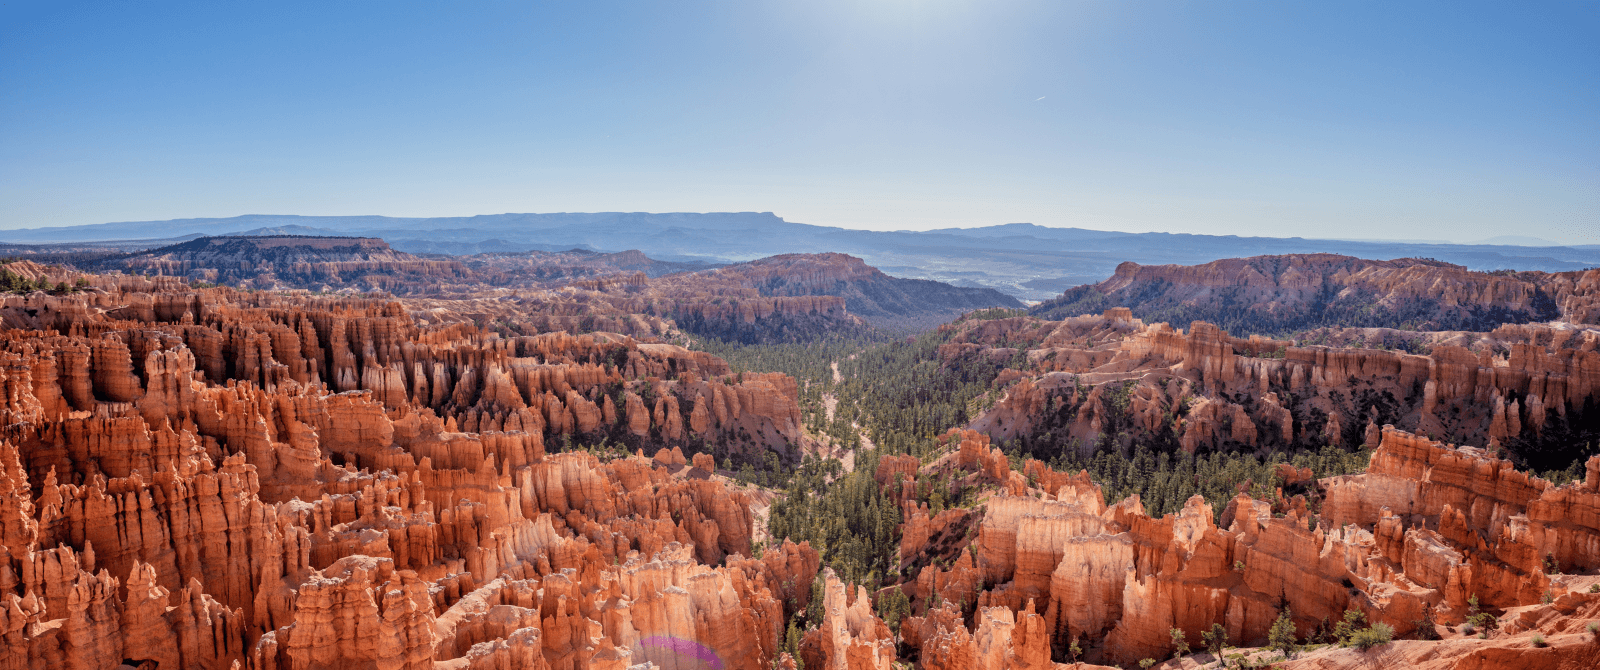 view of Bryce and Zion canyons from above